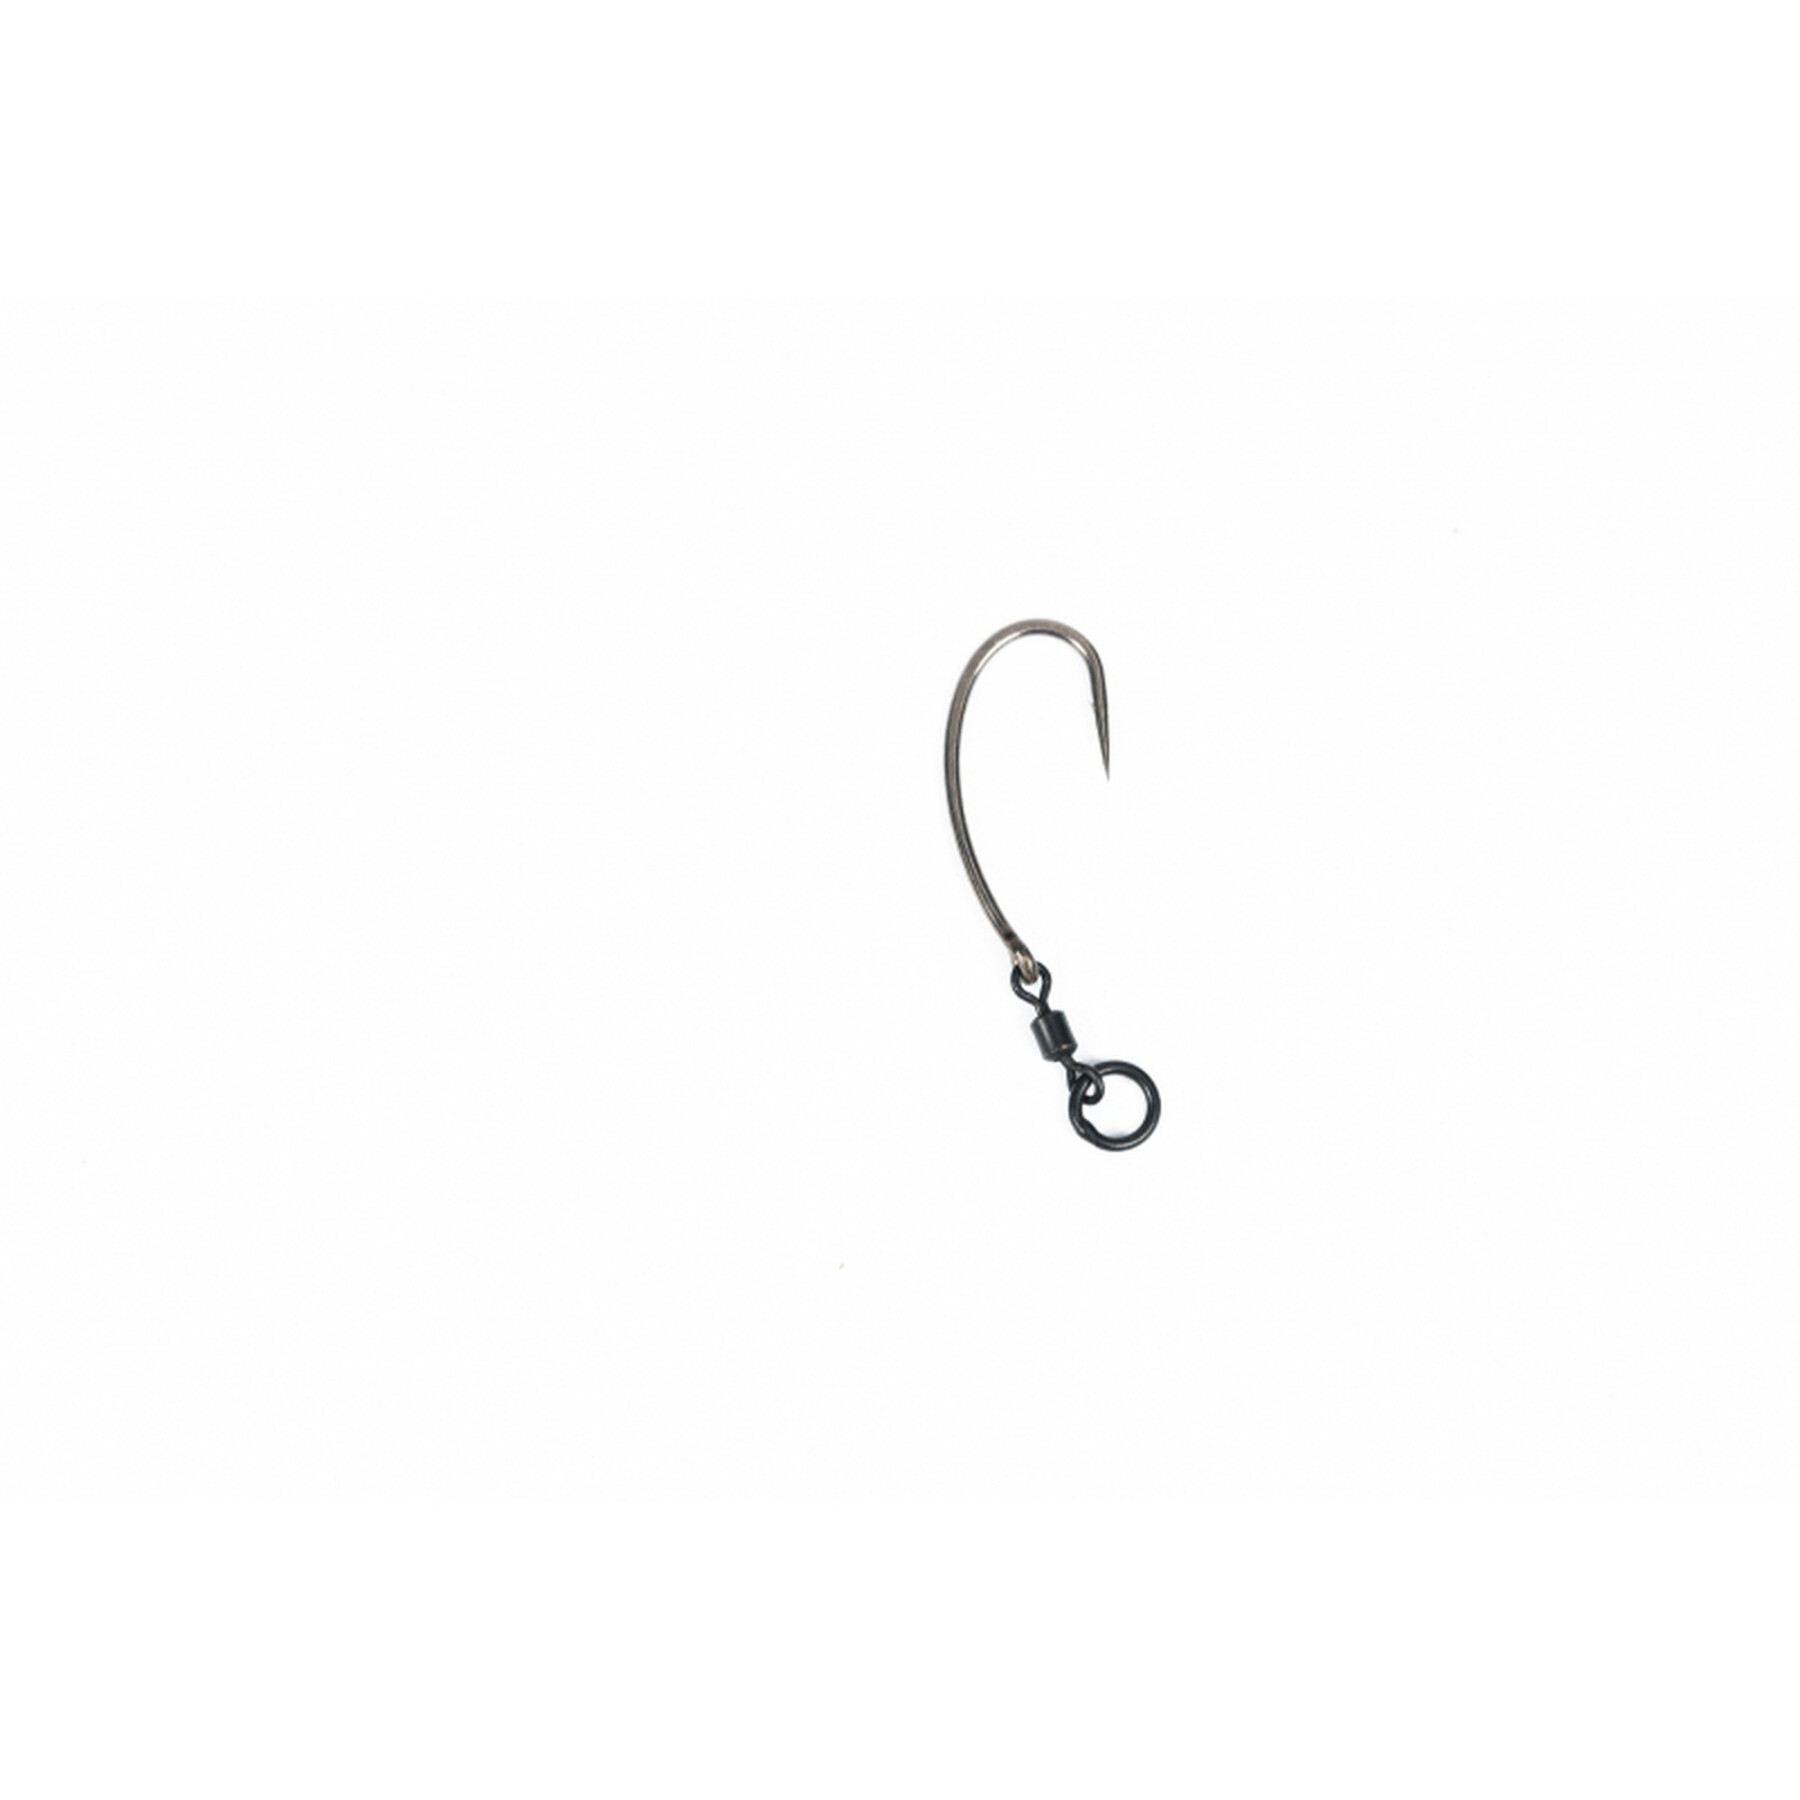 Hook Pinpoint Fang Gyro size 4 without swivel